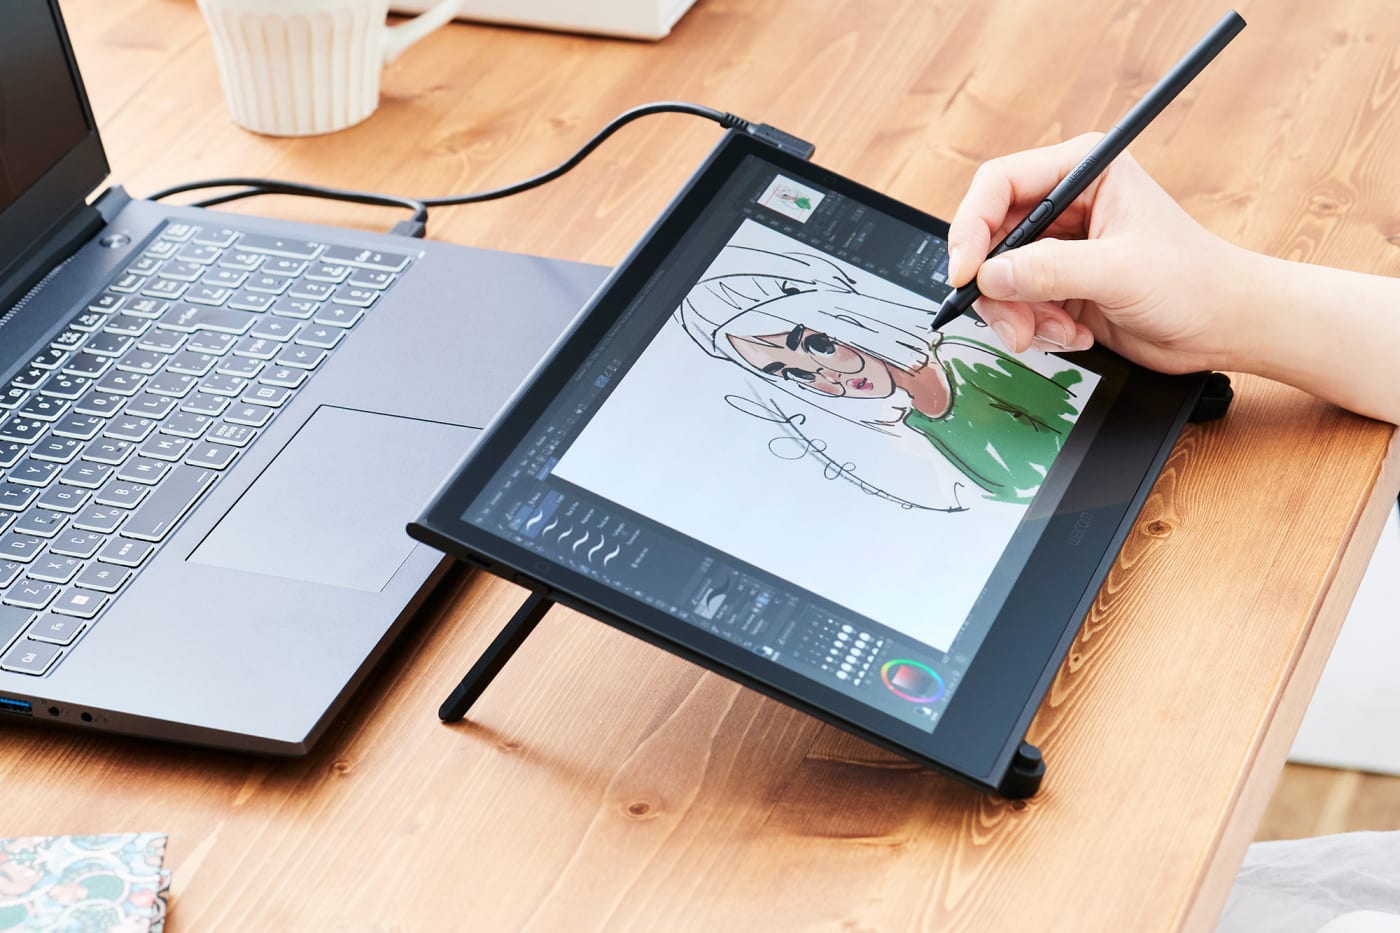 Wacom's first OLED pen display is also the thinnest and lightest it has ever made